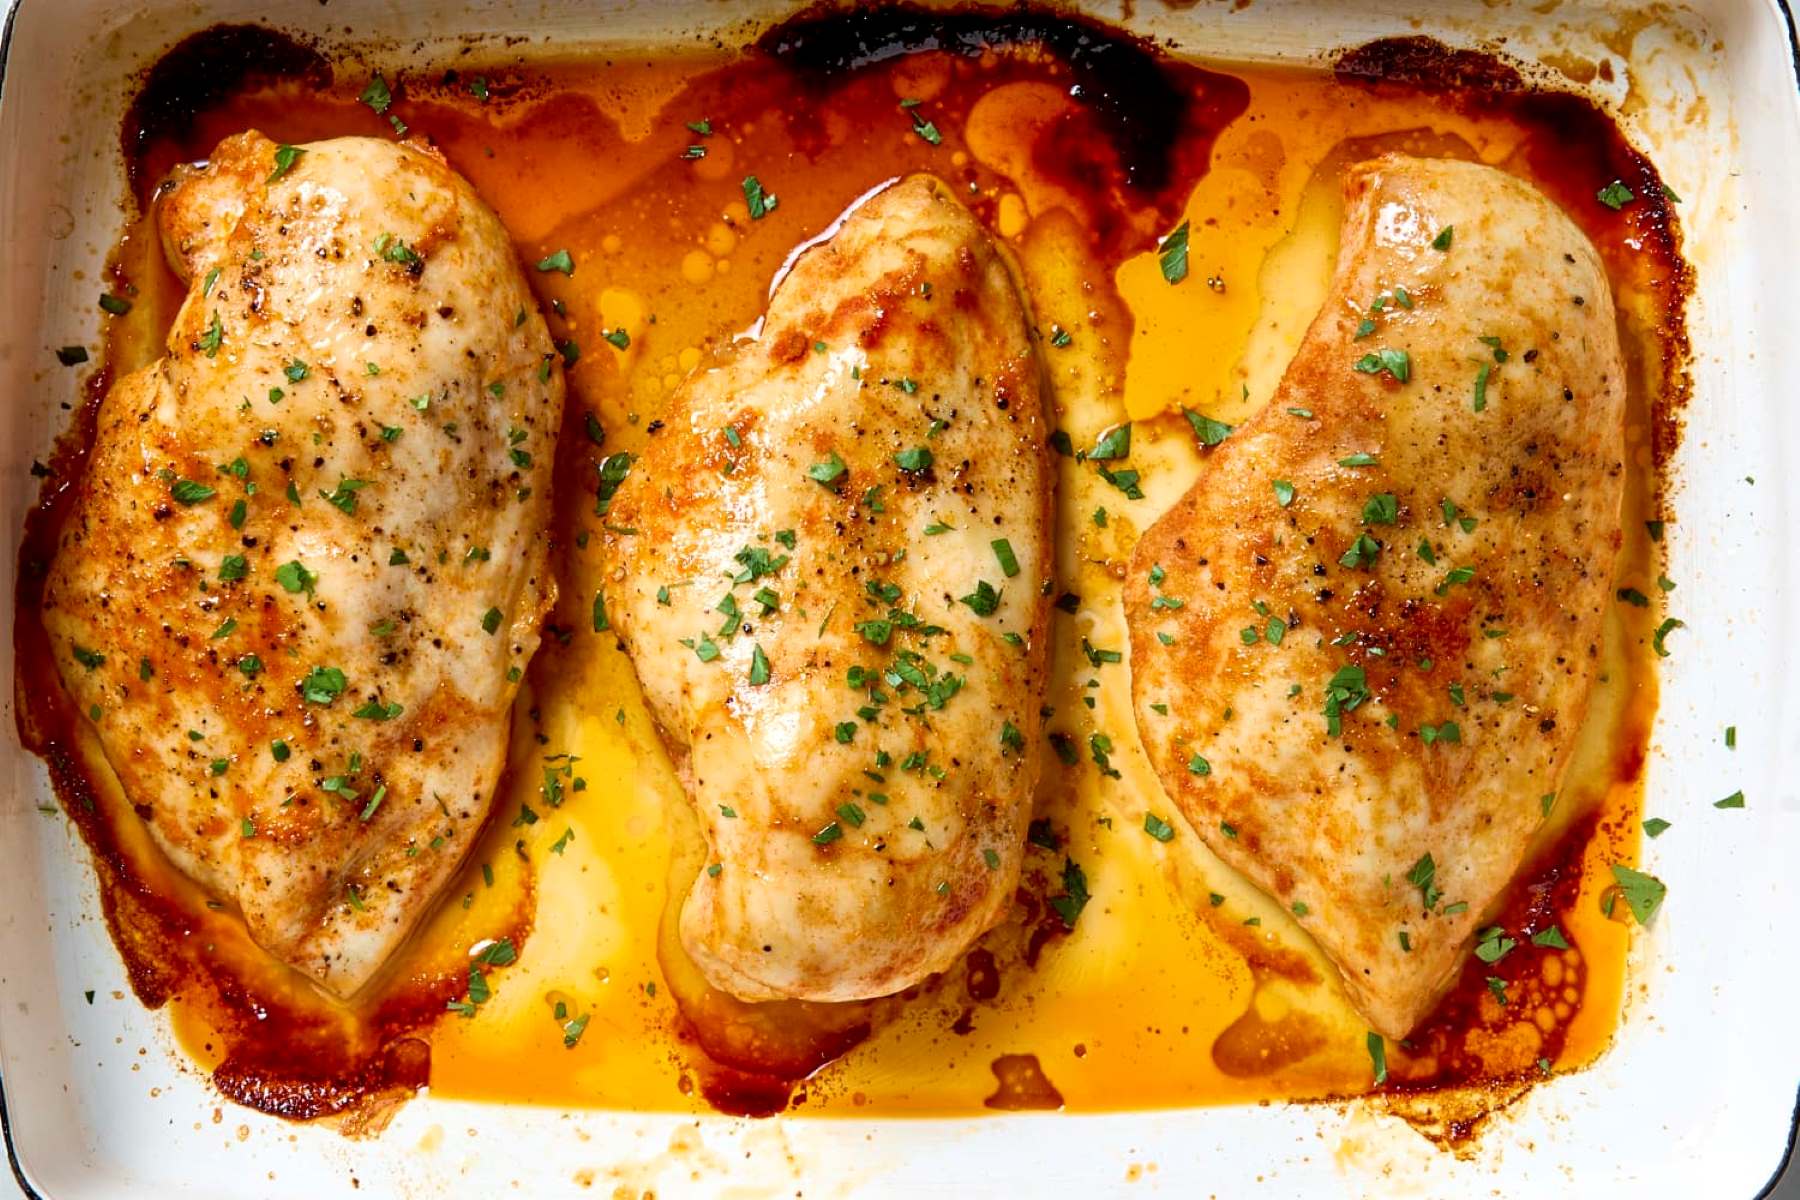 The Surprising Calorie And Protein Content Of Baked Skinless Chicken Breast!